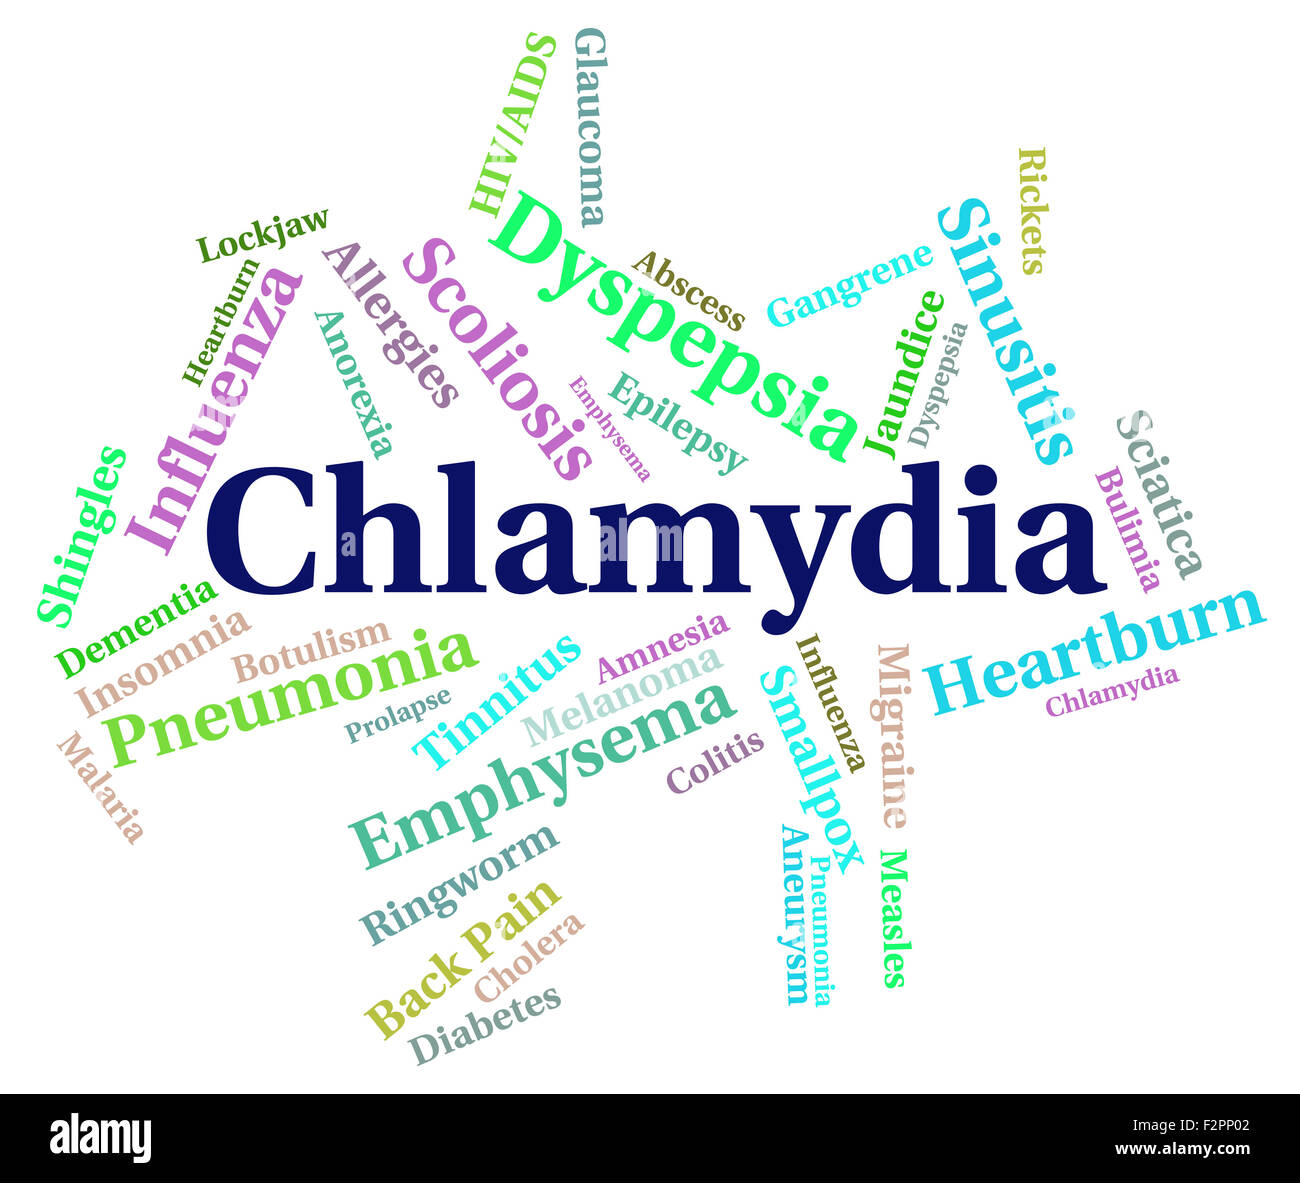 Chlamydia Word Meaning Sexually Transmitted Disease And Poor Health Stock Photo